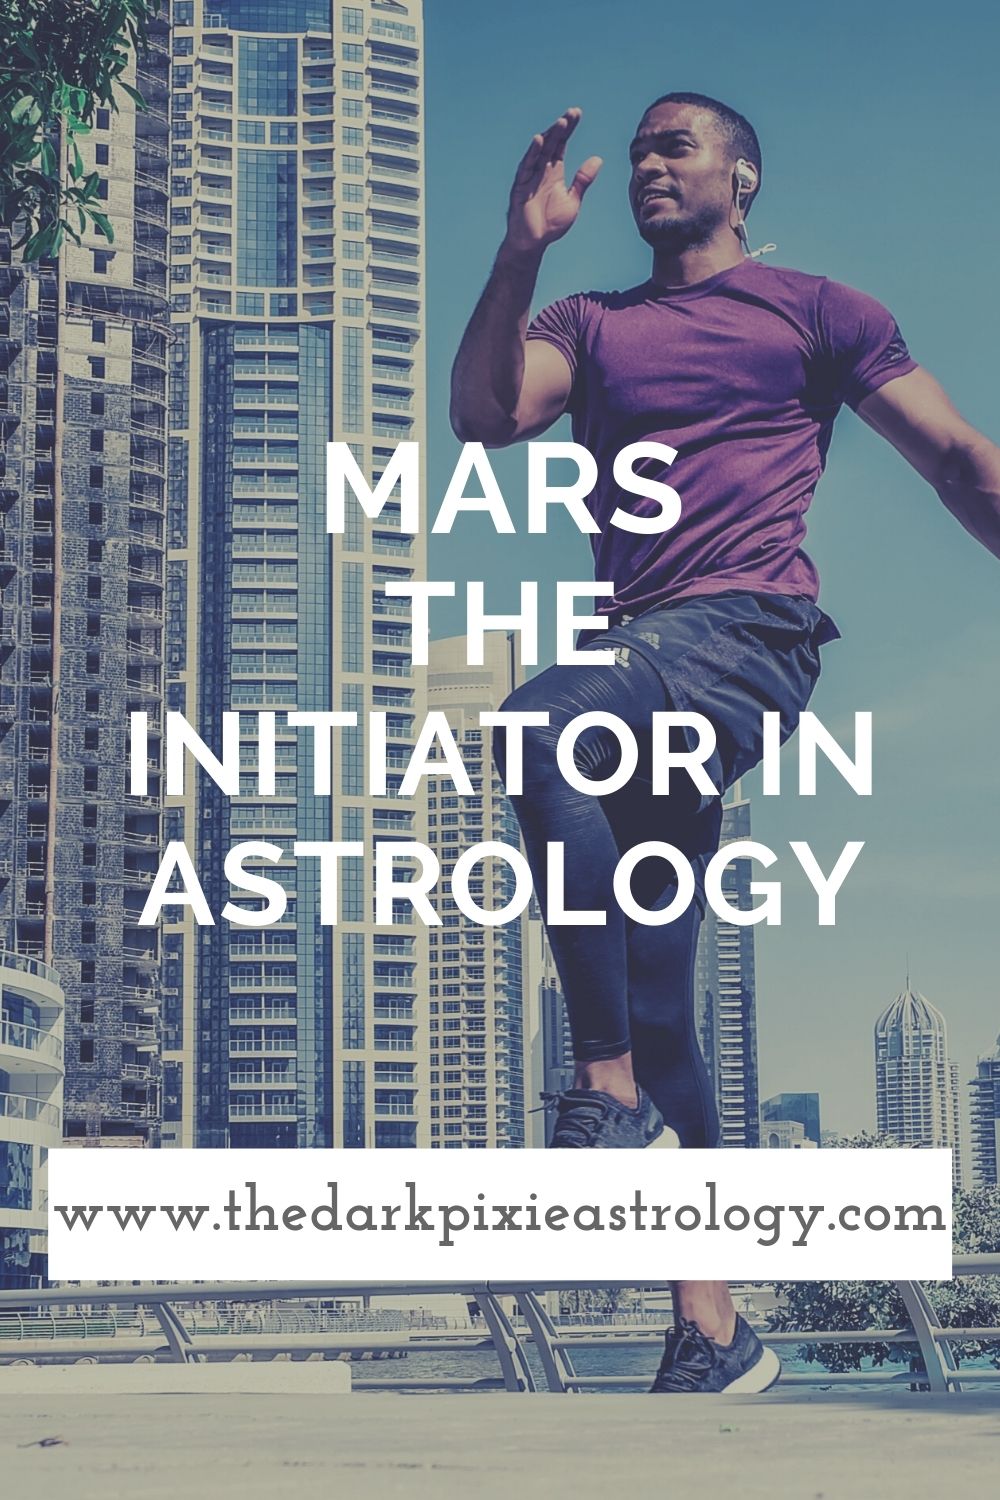 Mars the Initiator in Astrology - The Dark Pixie Astrology